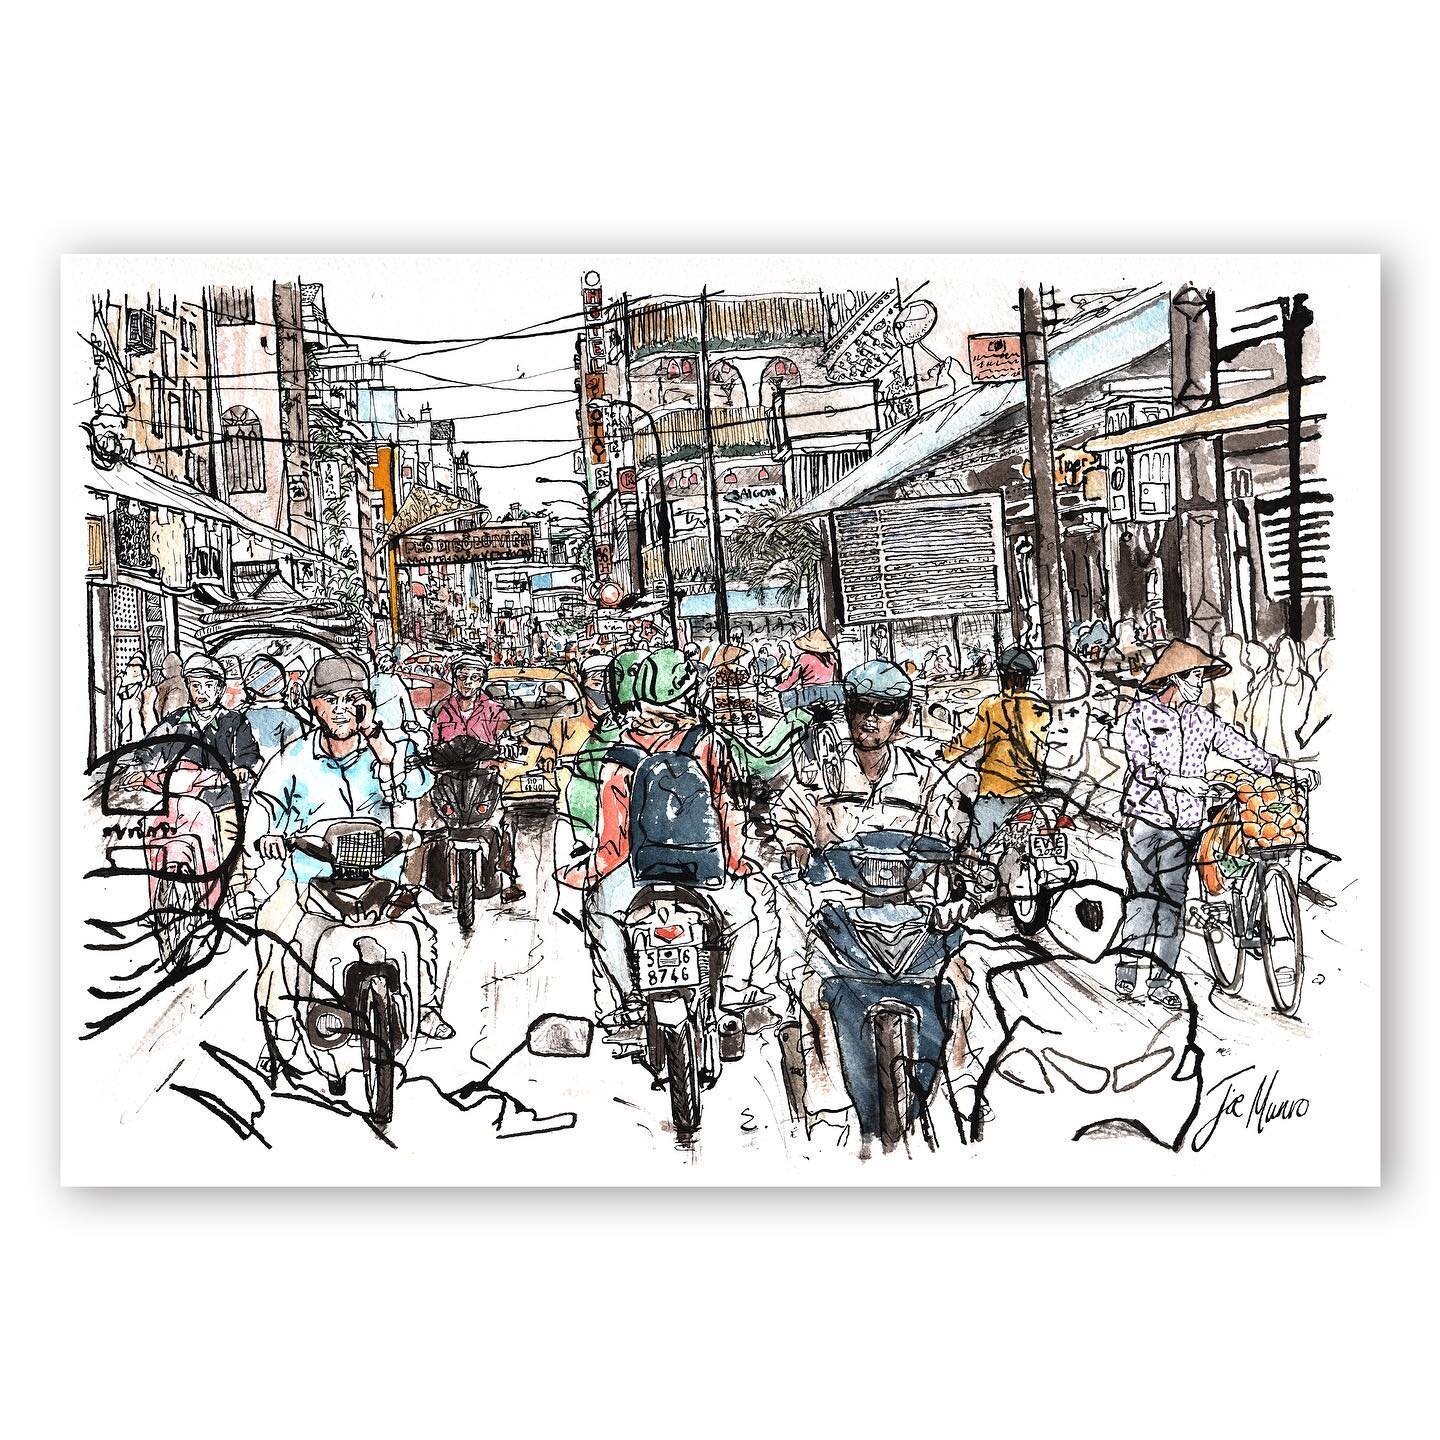 Recently finished this piece, a energetic Vietnamese street using a collection of drawings and photos from travelling across the country a few years ago. 🇻🇳🛵
.
.
.
.
.
.
.
.
.
#vietnam #vietnamtravel #vietnamese #việtnam #vietnamtrip #vietnamese